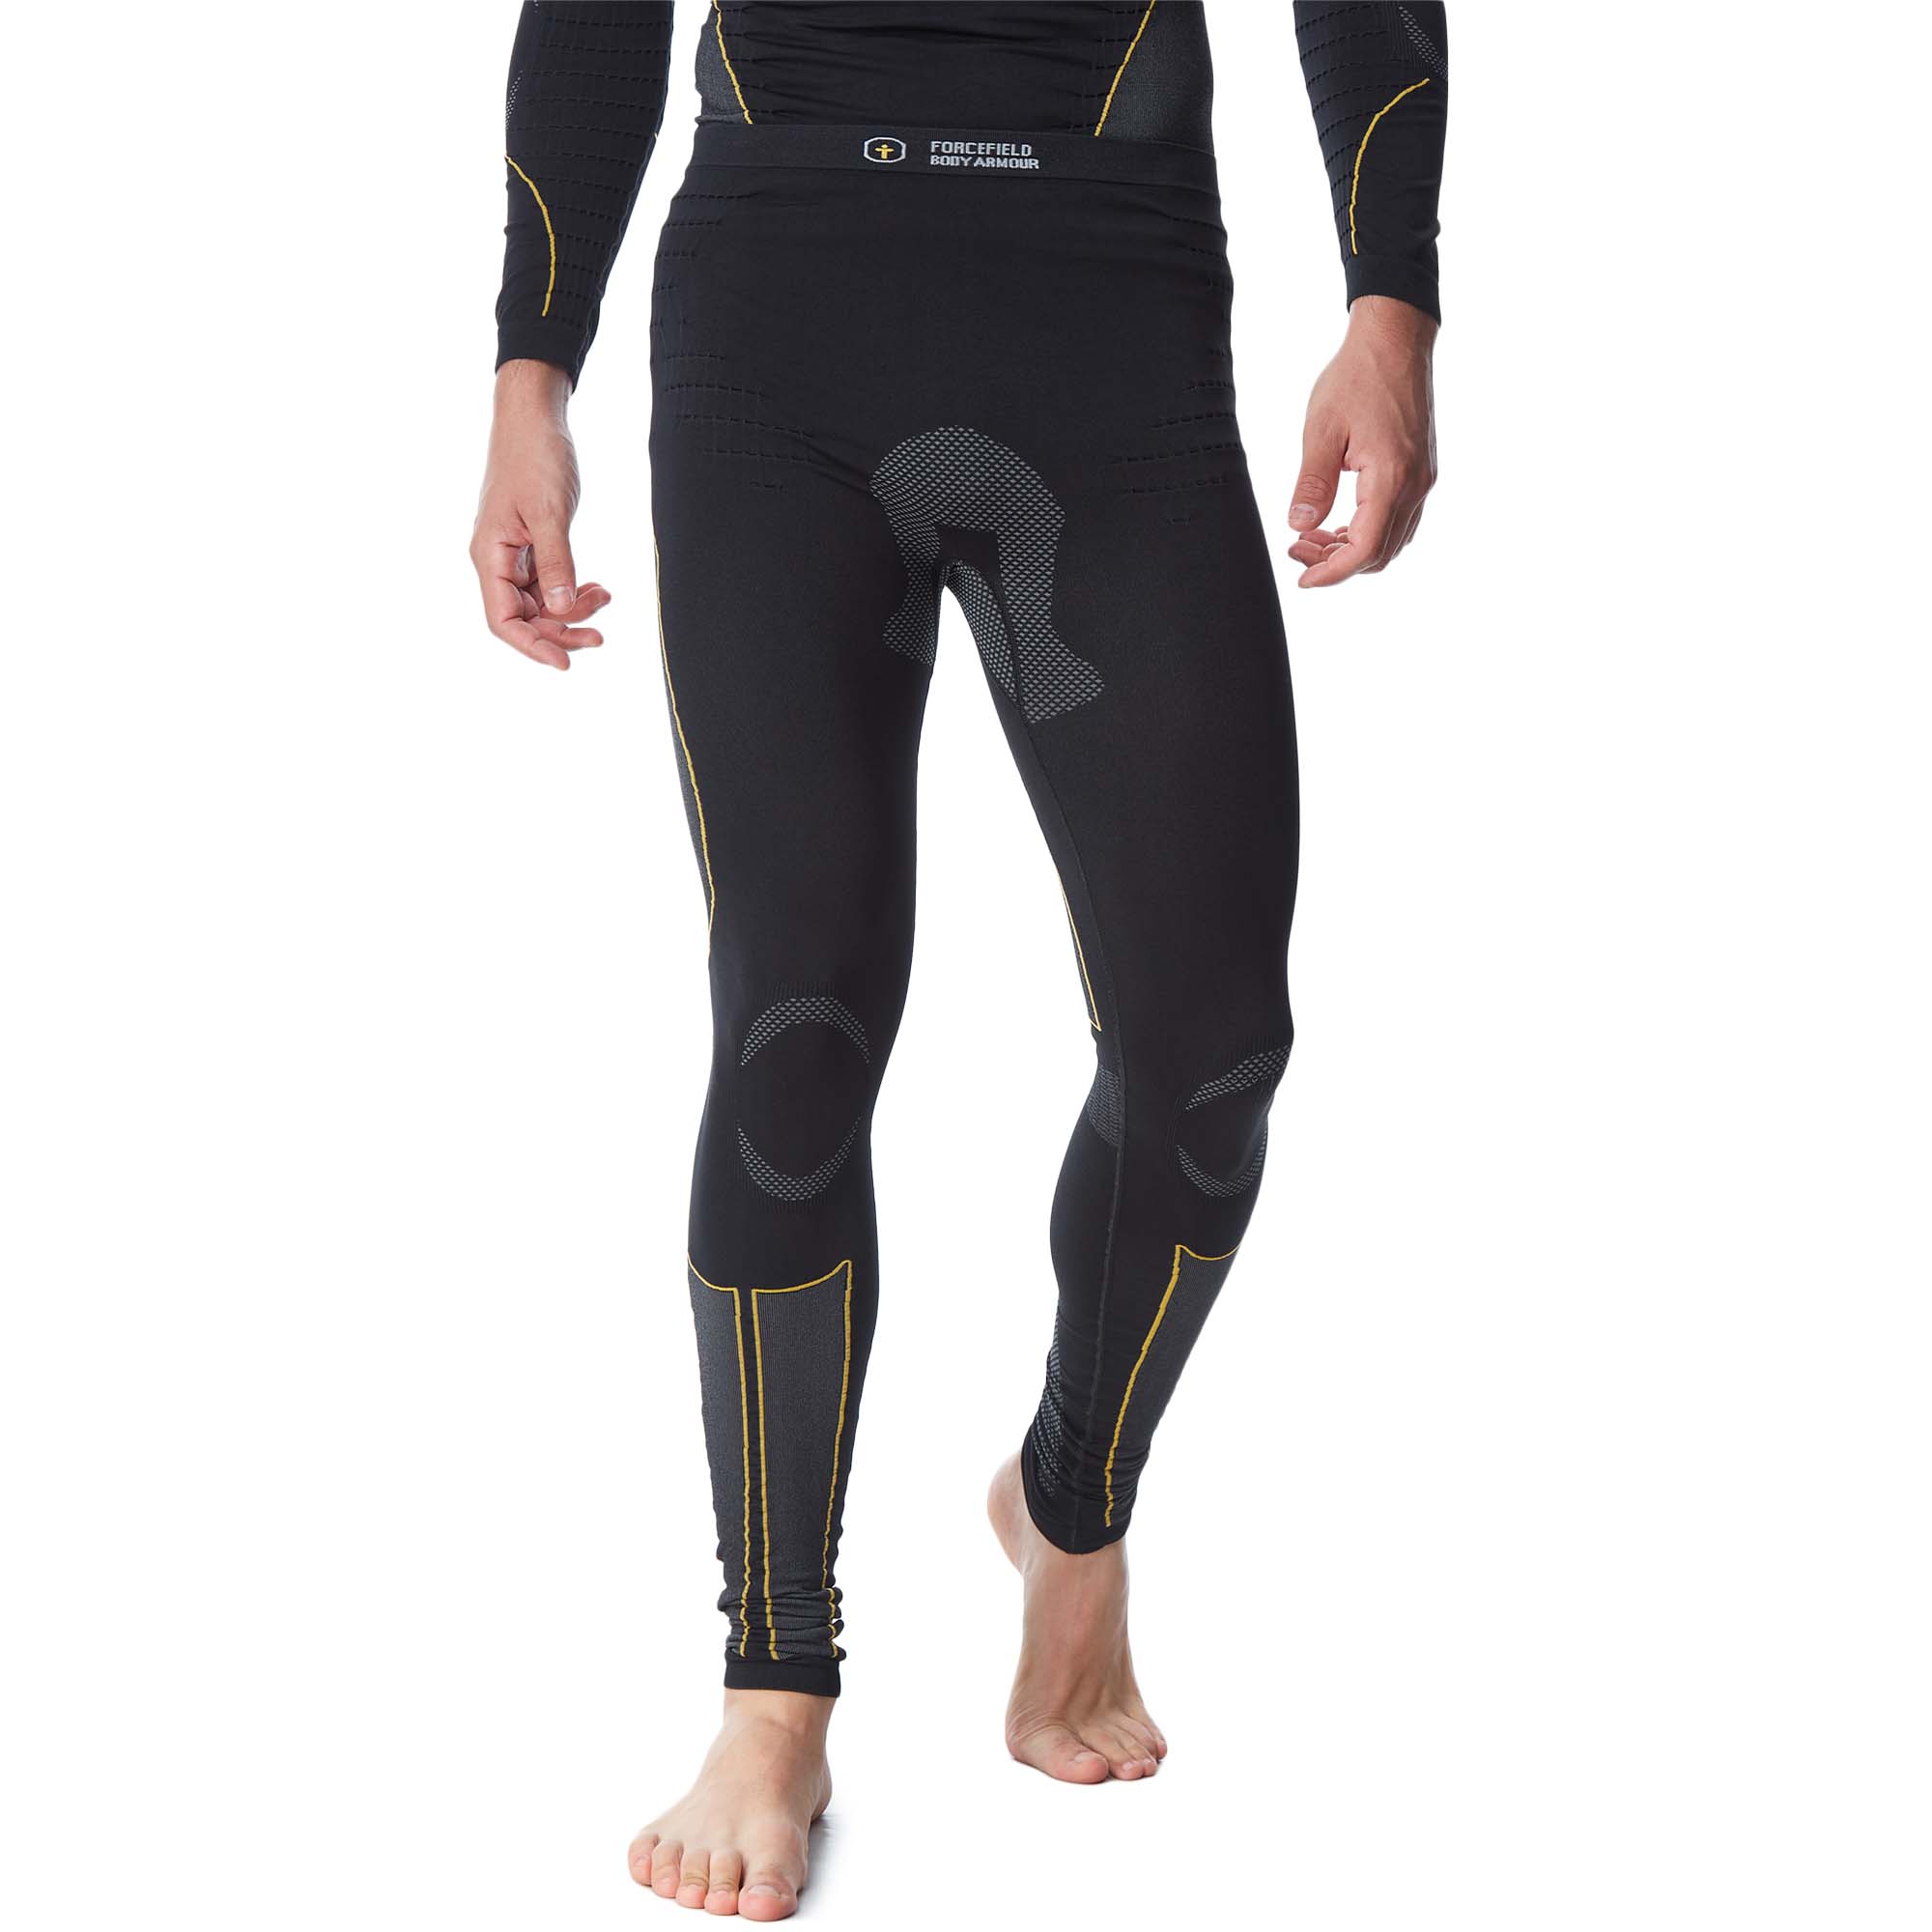 Forcefield Tech 3 Unisex Compression Pants